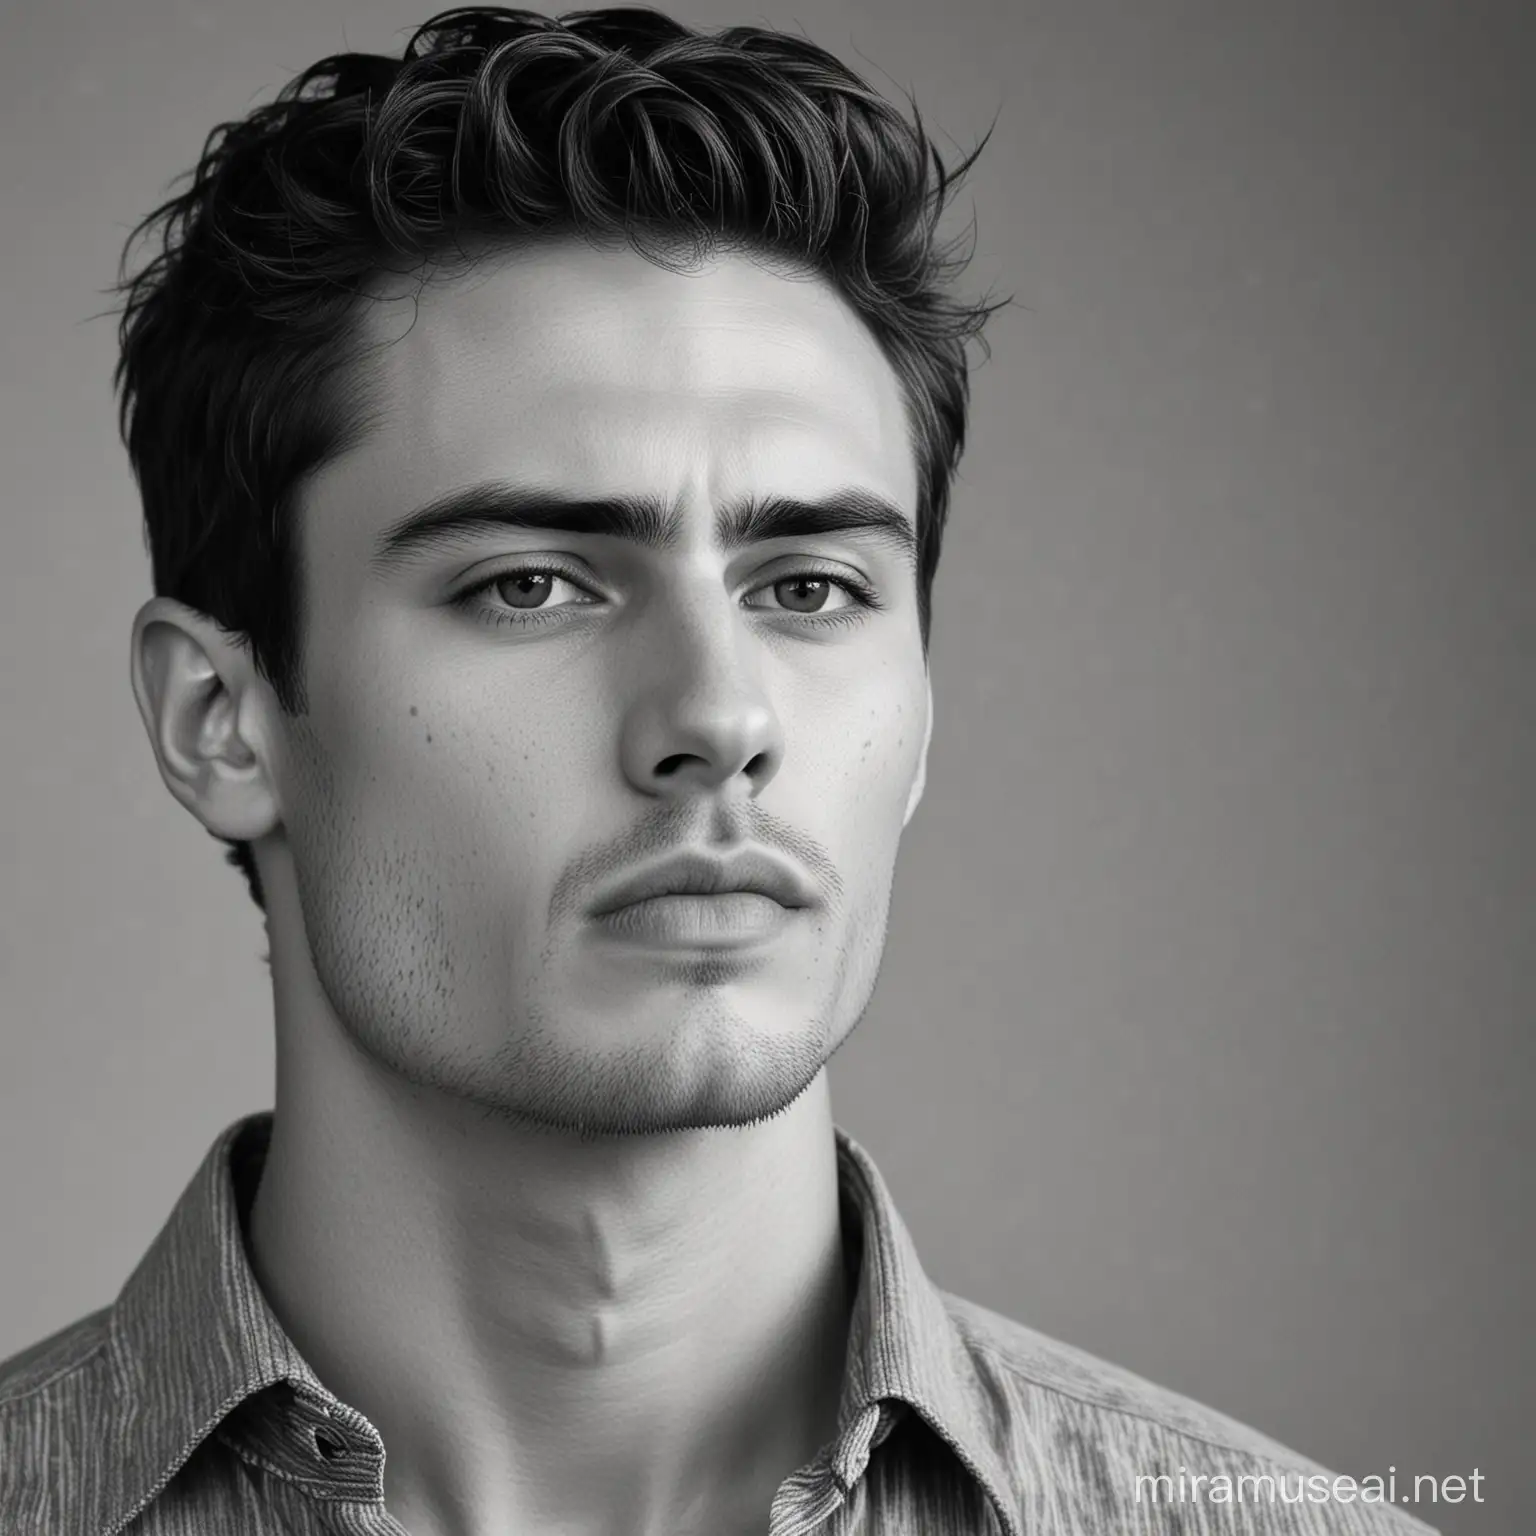 a young attractive male modeling dramatically in black and white. He has a sharp jawline and is looking down